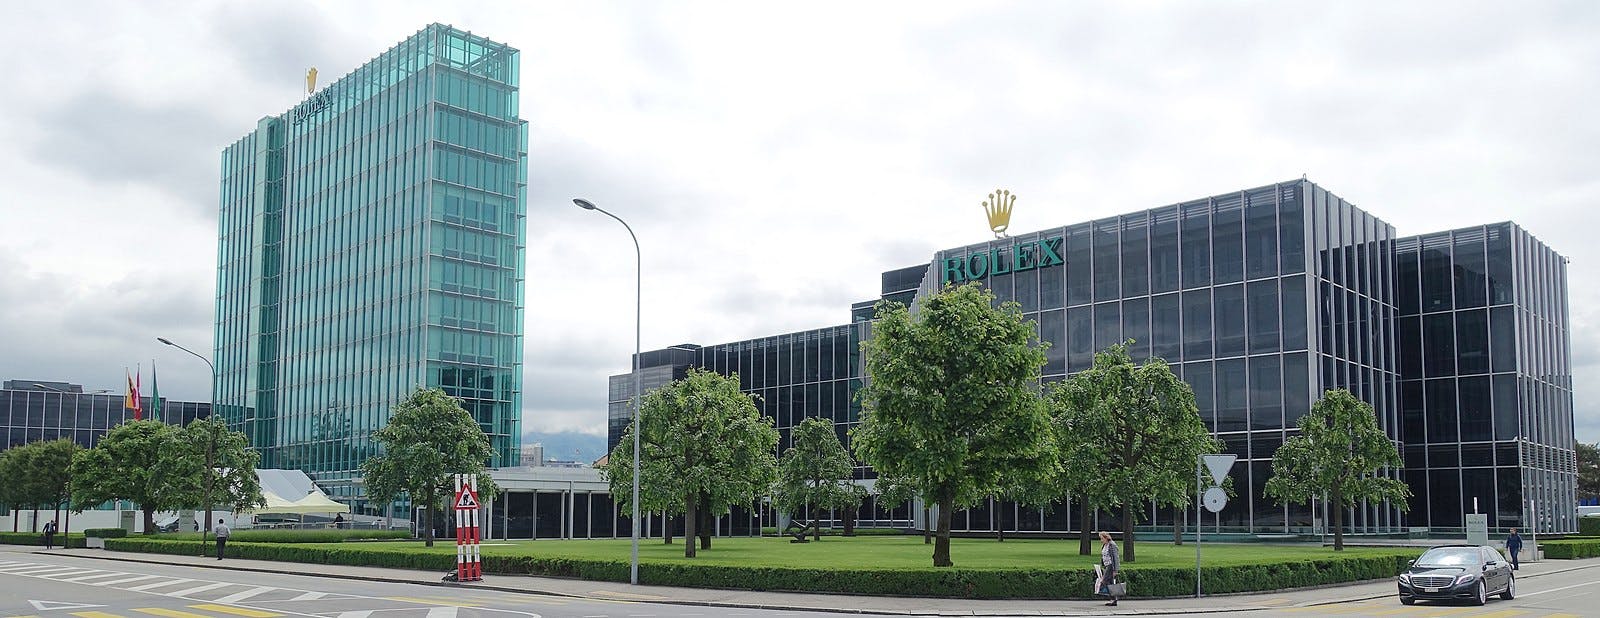 Rolexes largest facility in Geneva where the assembly and testing of all of their watches takes place.